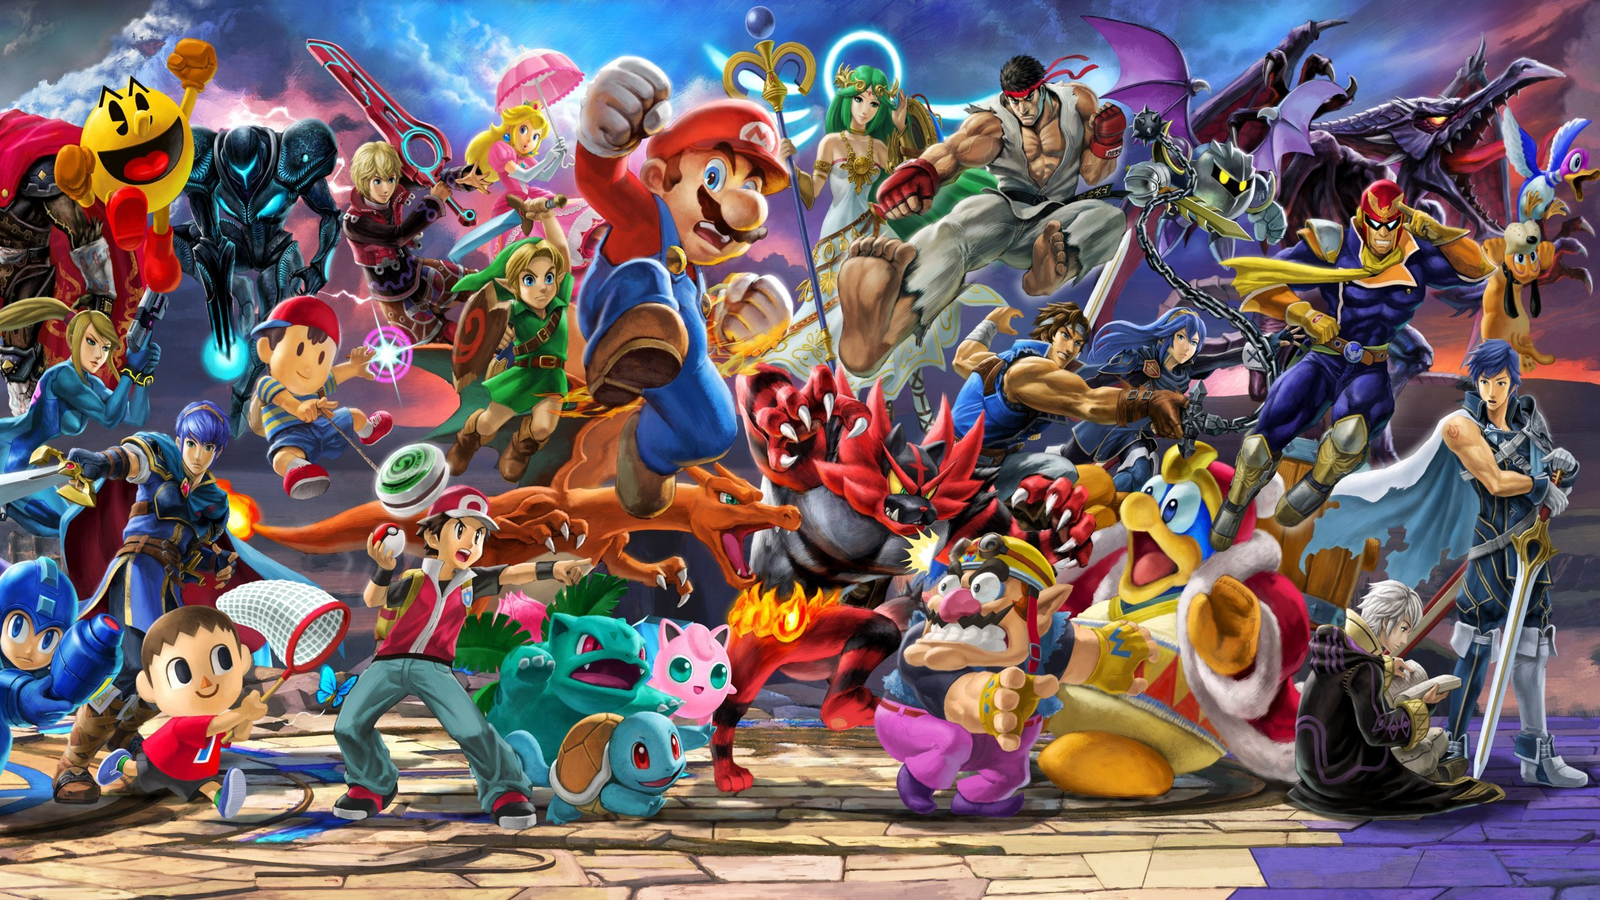 Sakurai encourages everyone to watch Smash Bros.' final character reveal  'even if you don't play' | VG247